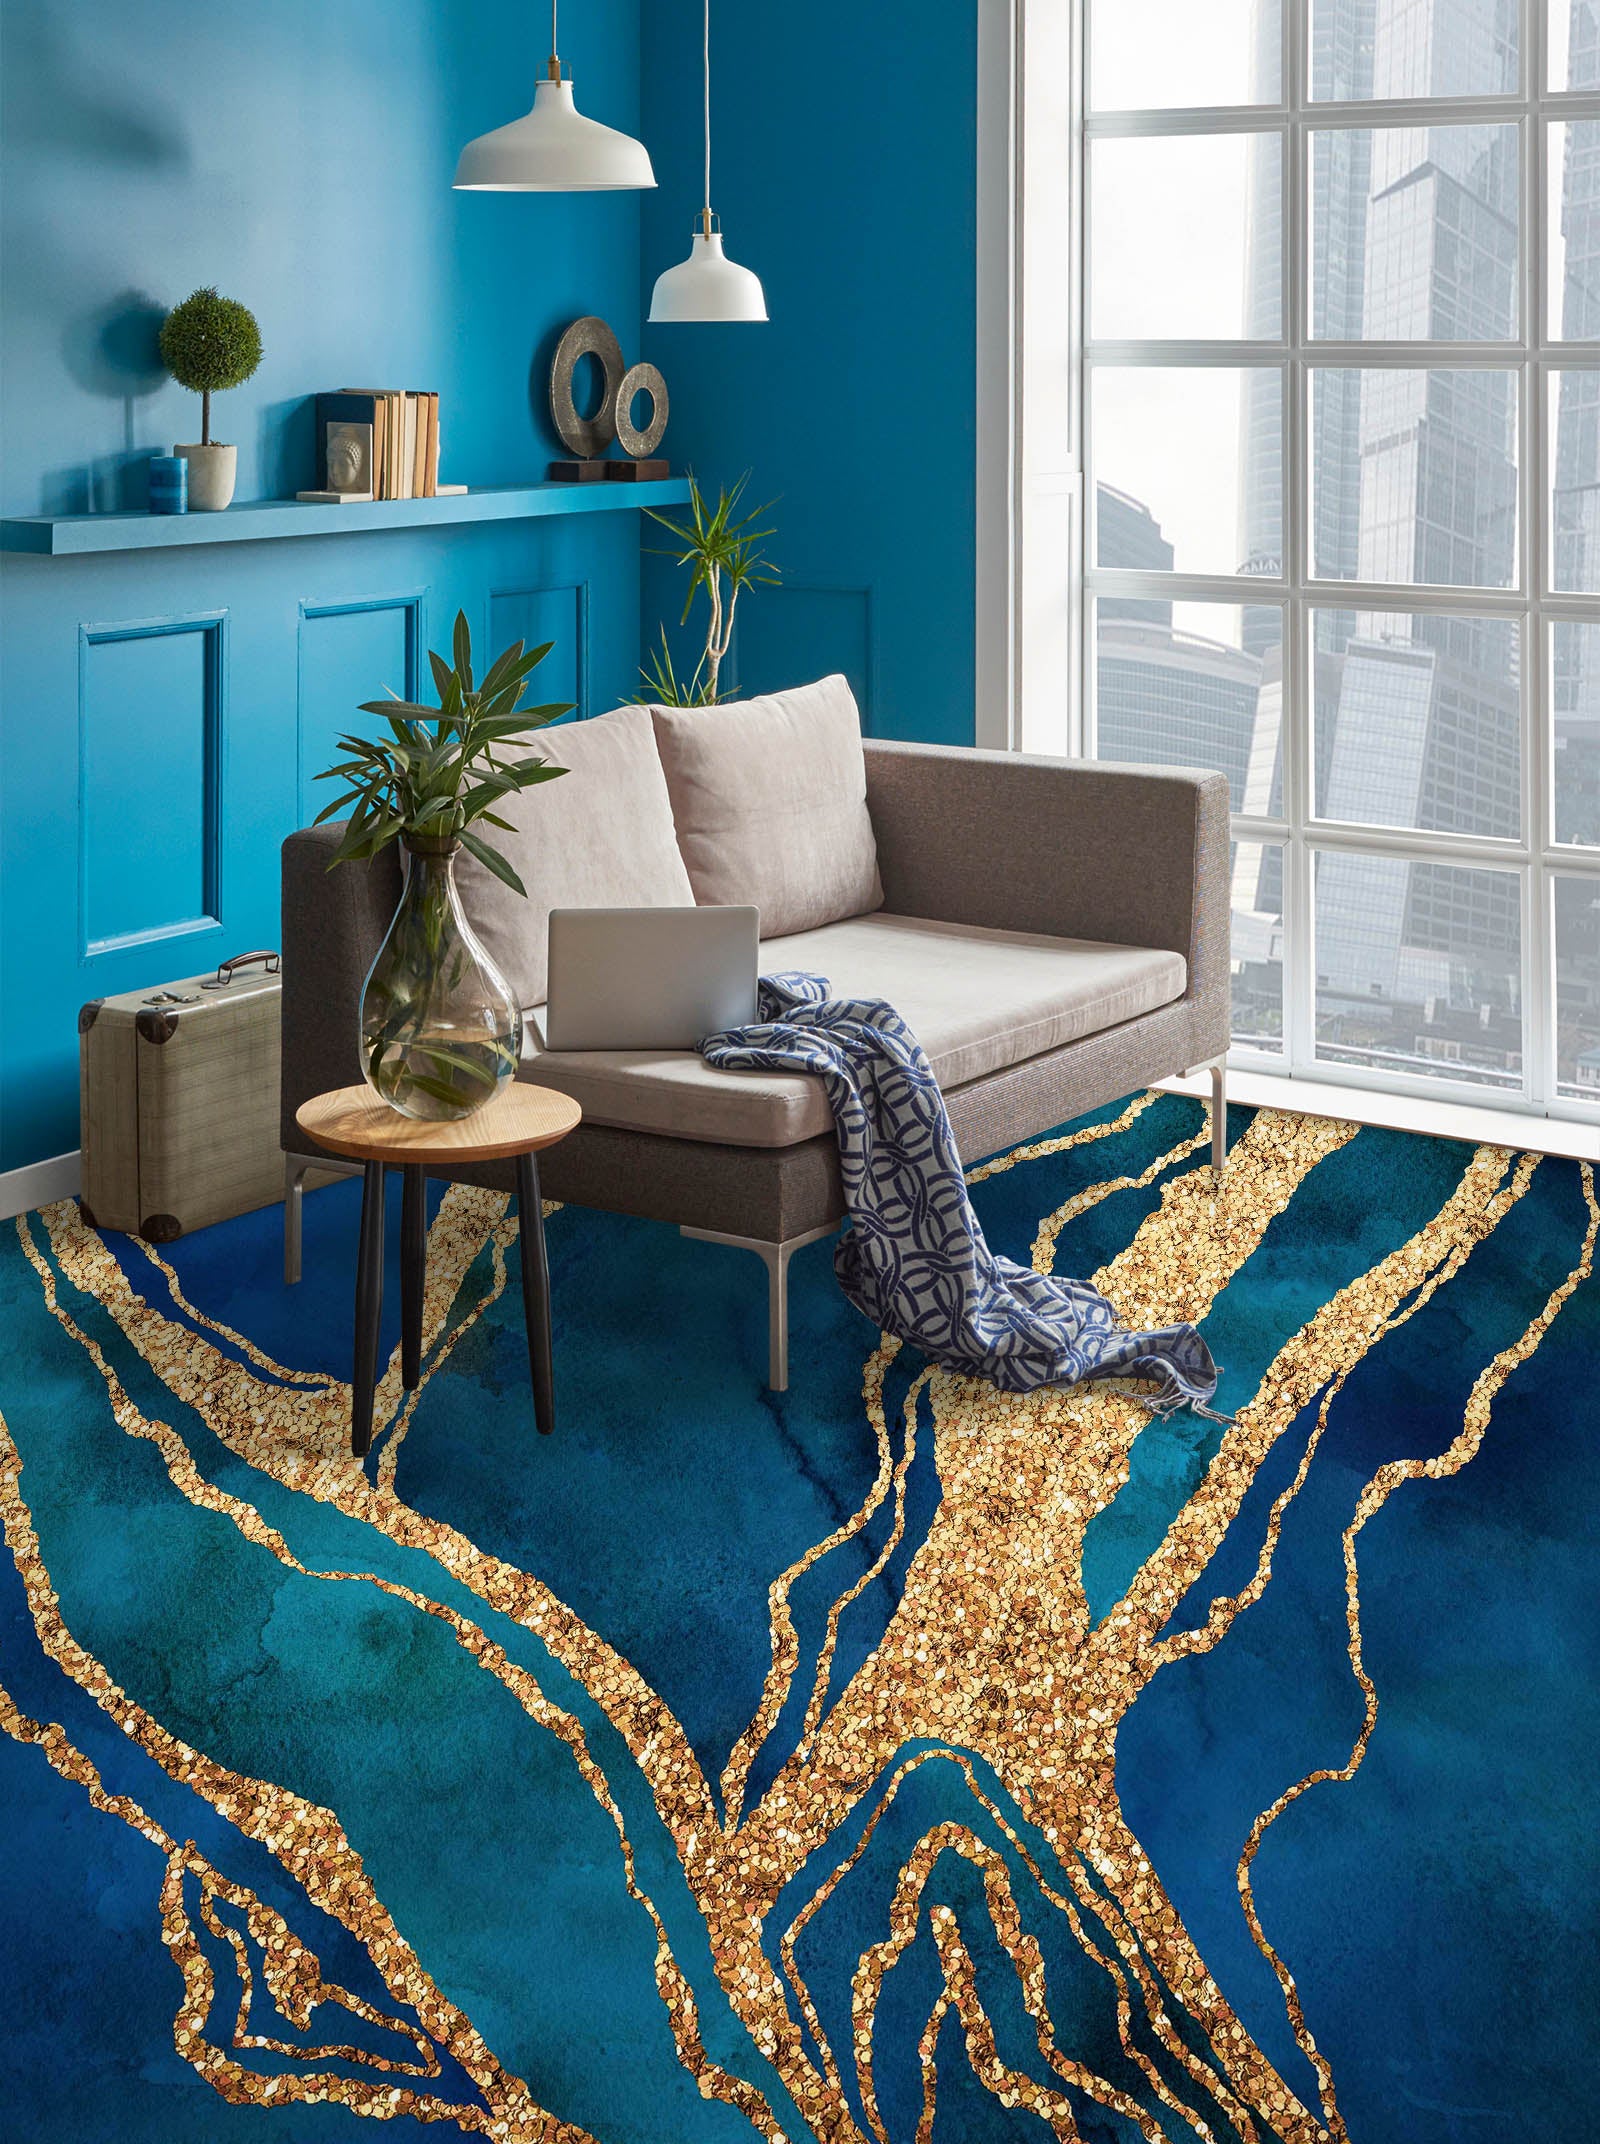 3D Blue Gold Texture 102123 Andrea Haase Floor Mural  Wallpaper Murals Self-Adhesive Removable Print Epoxy